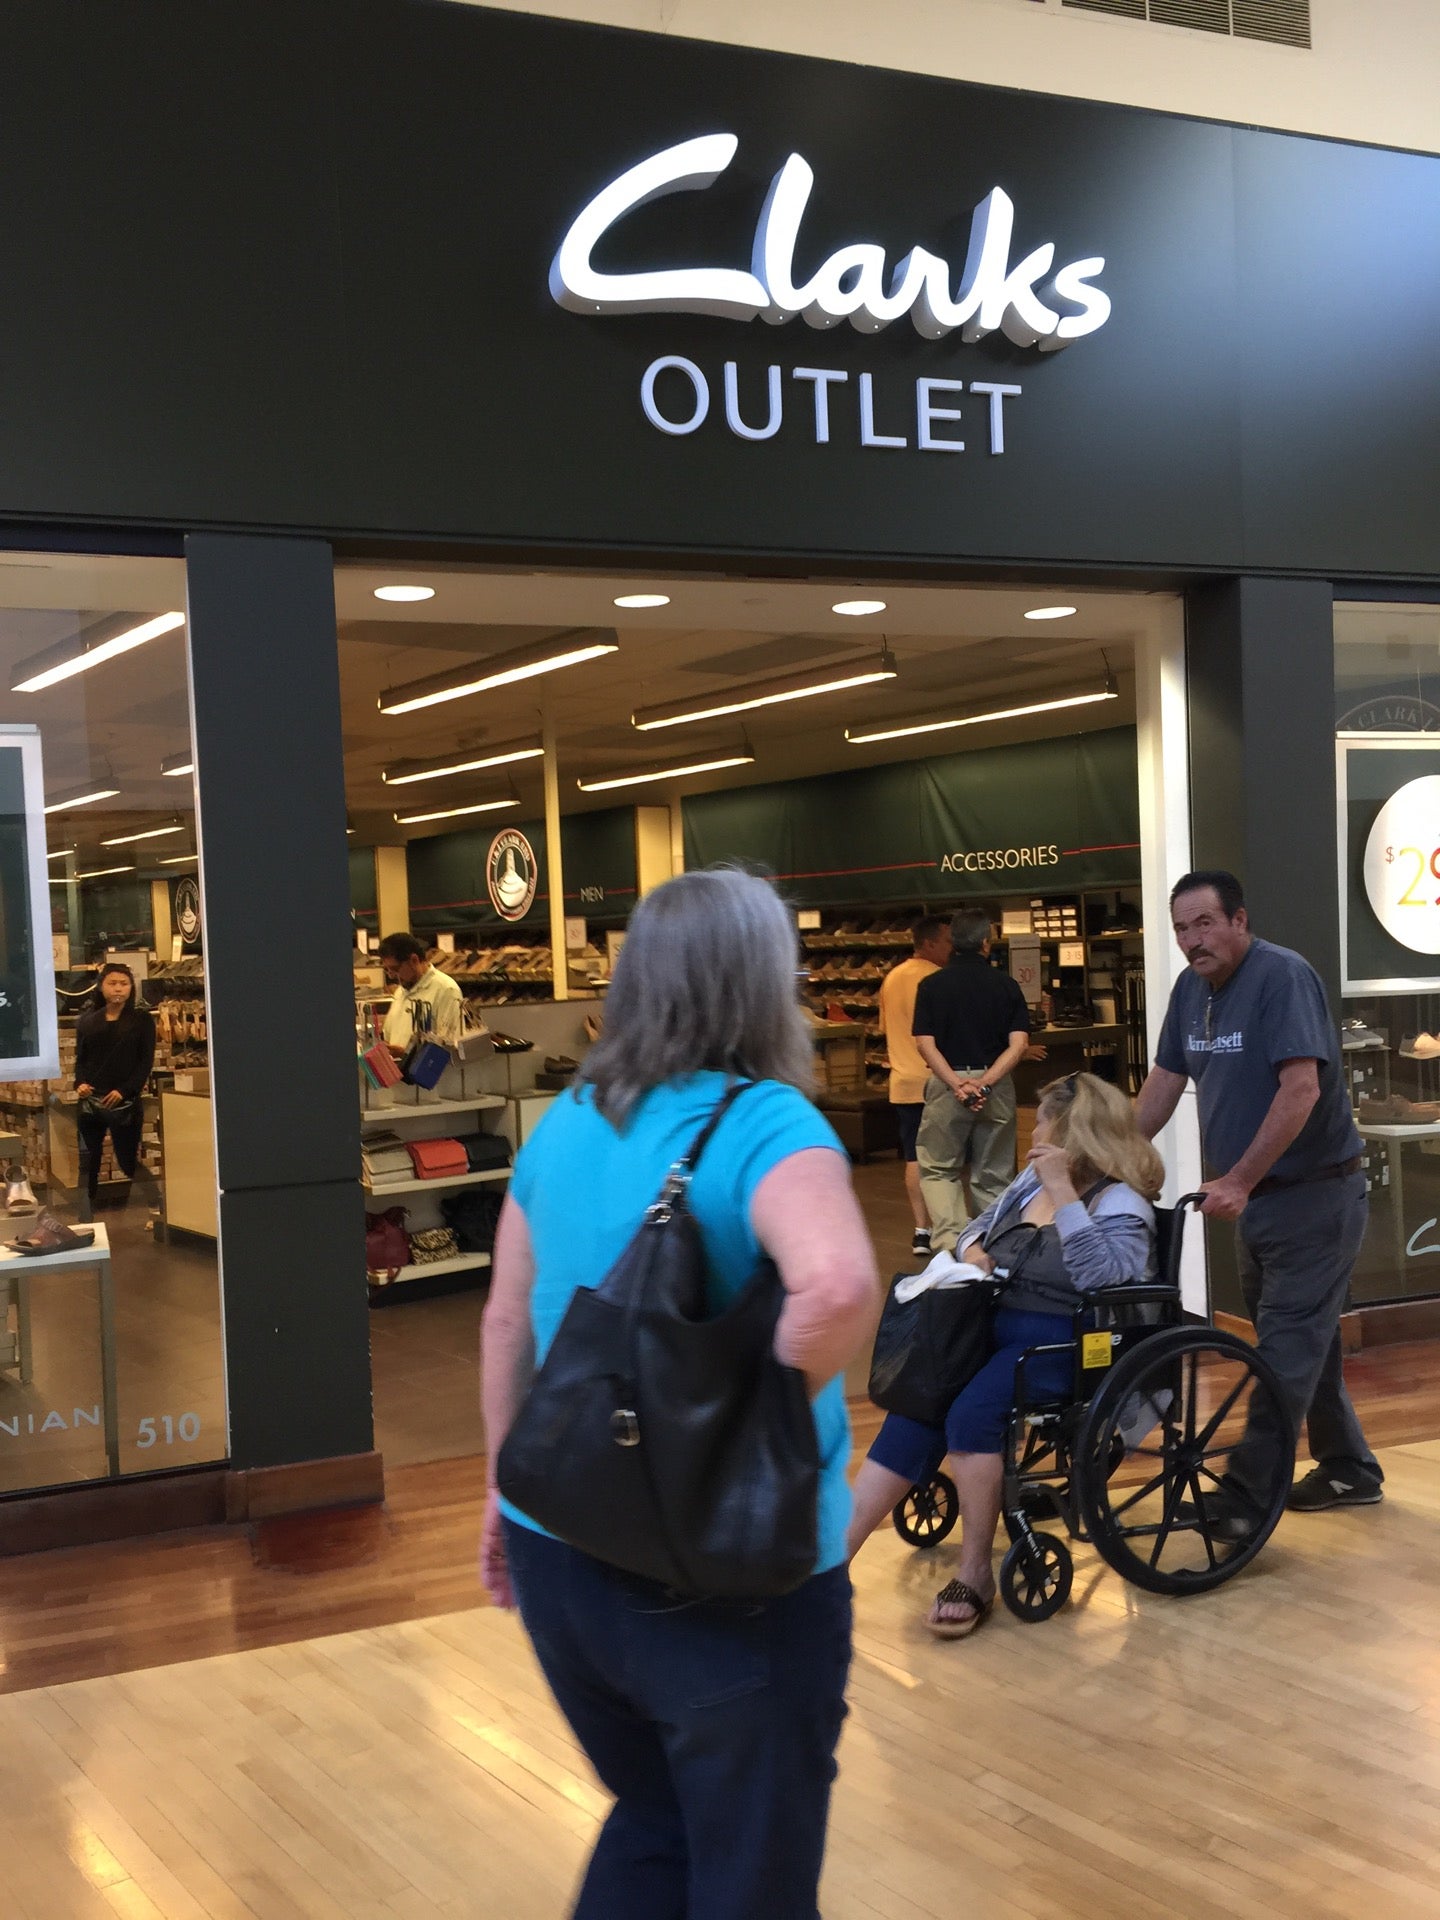 Clarks Outlet, 1 Mills Cir, Suite 510, Ontario, CA, Retail - MapQuest